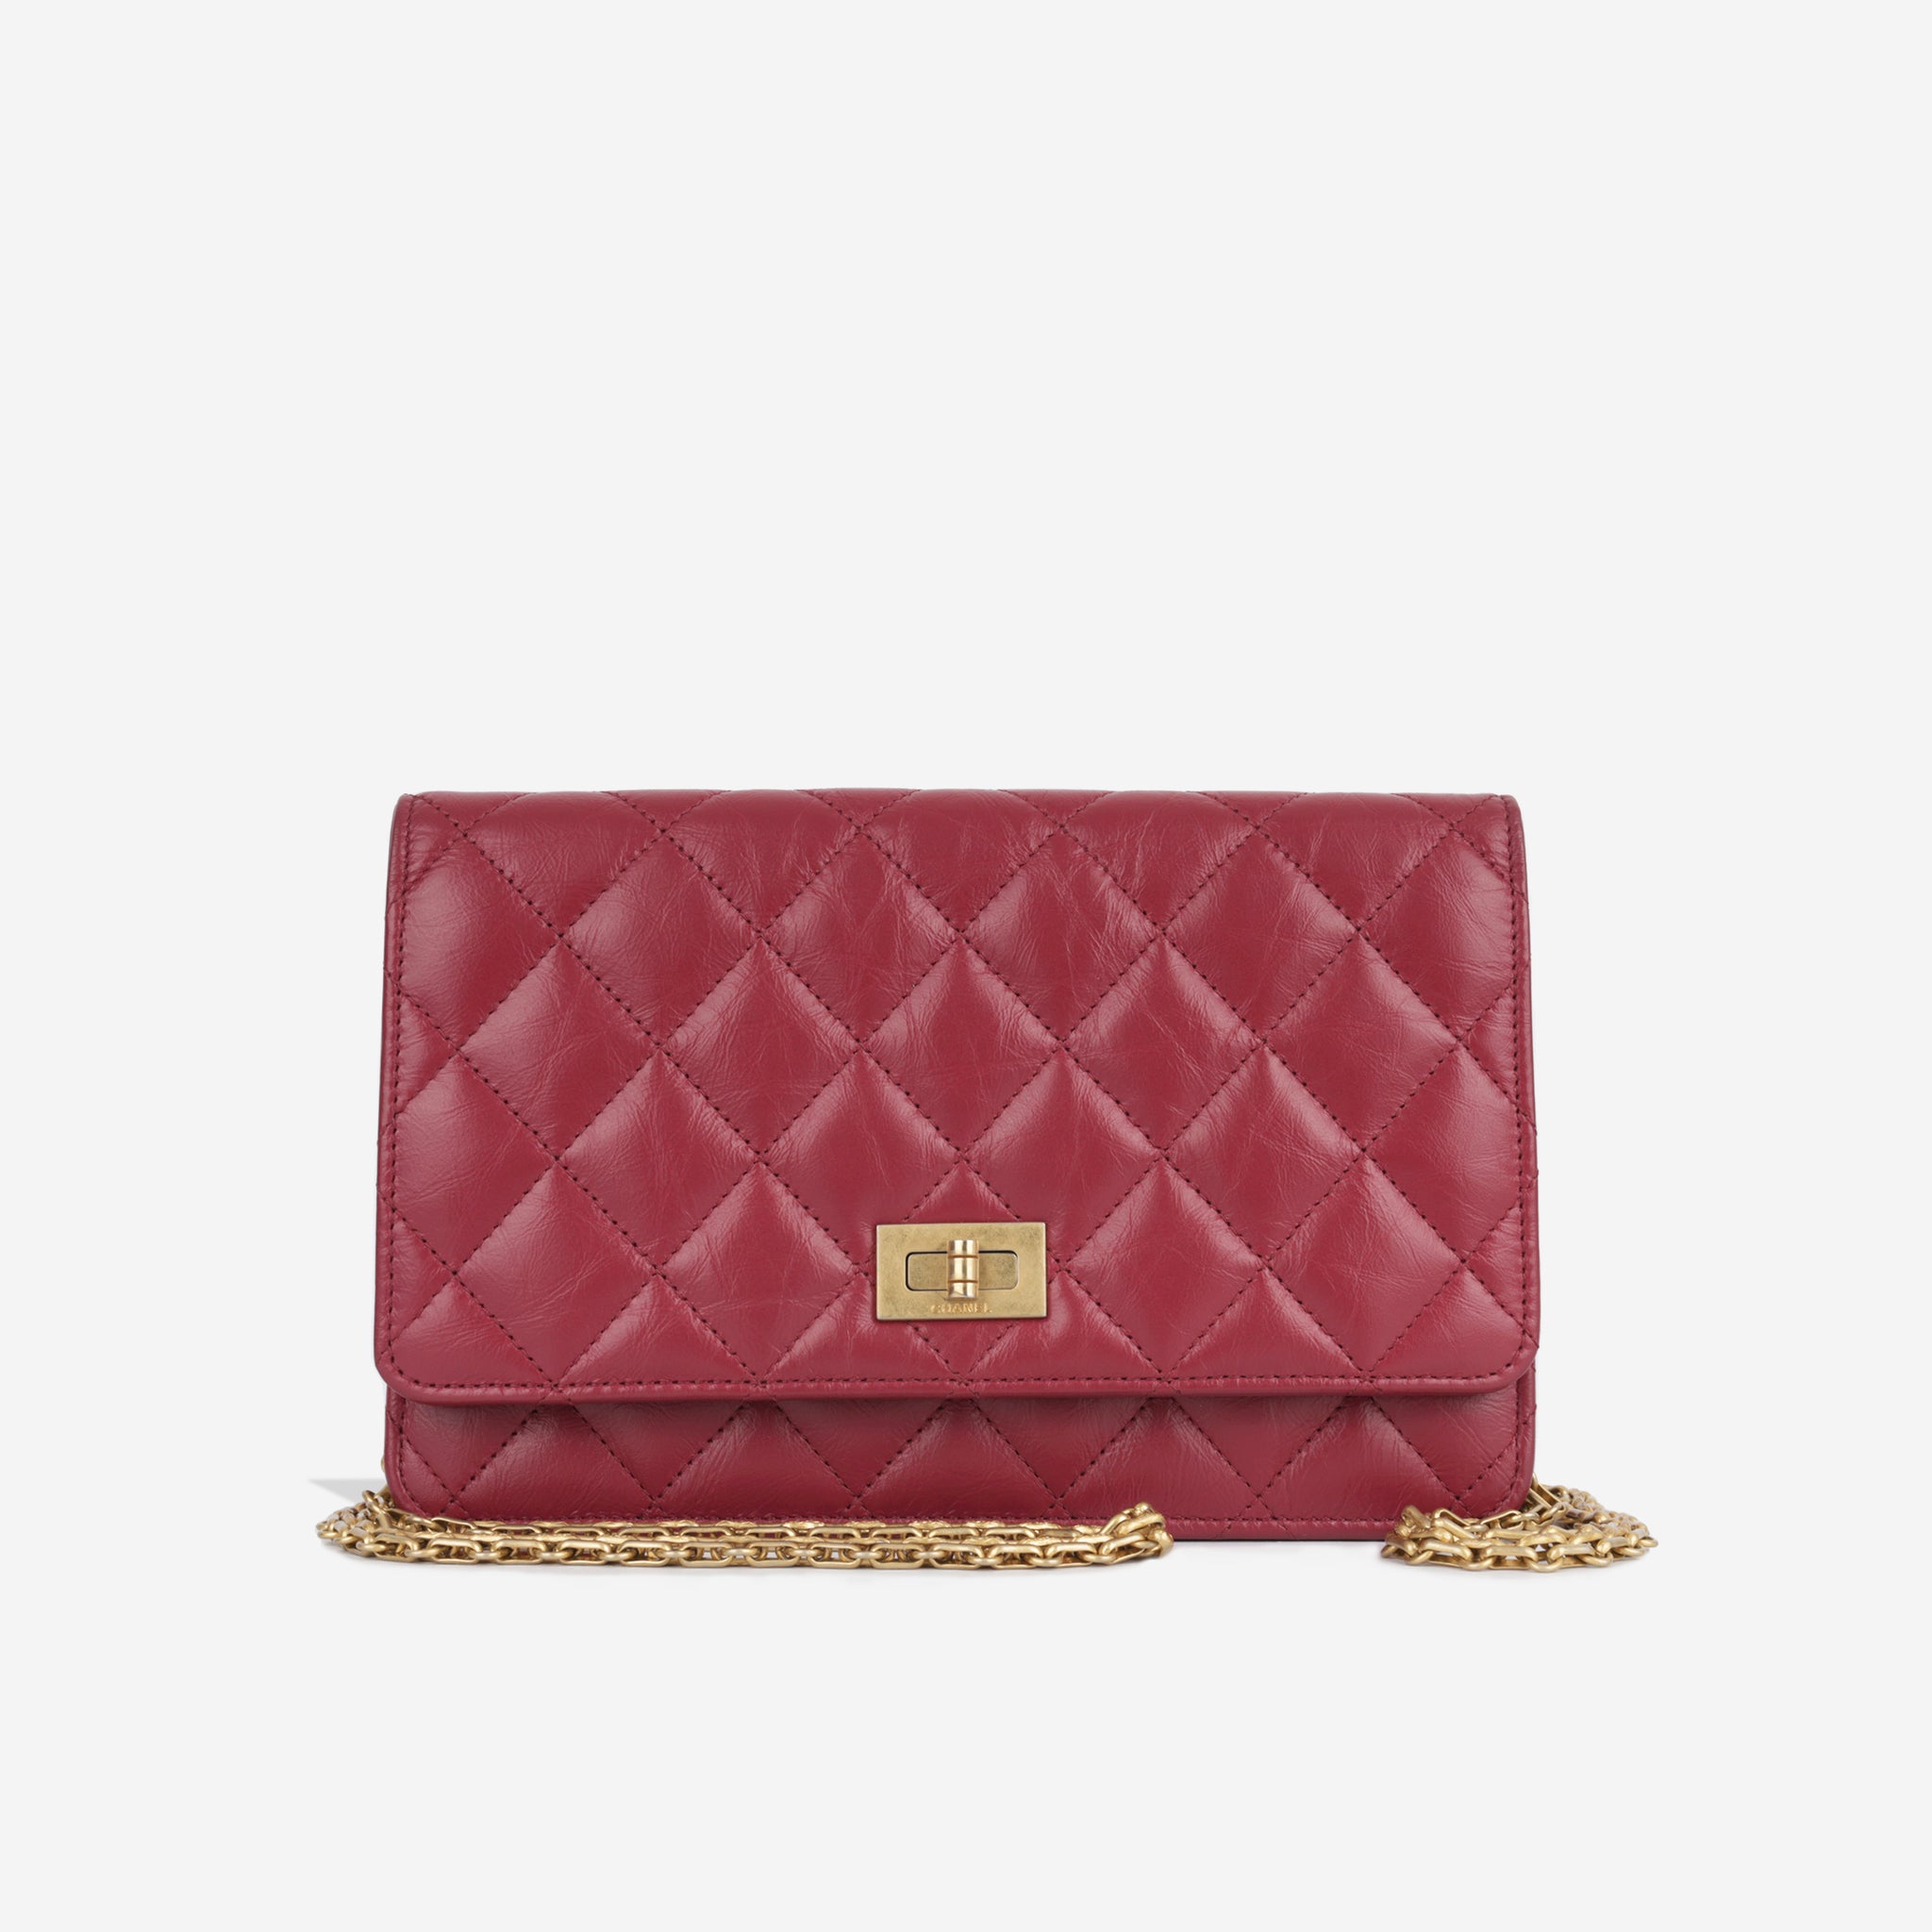 Chanel Re-issue Long Wallet